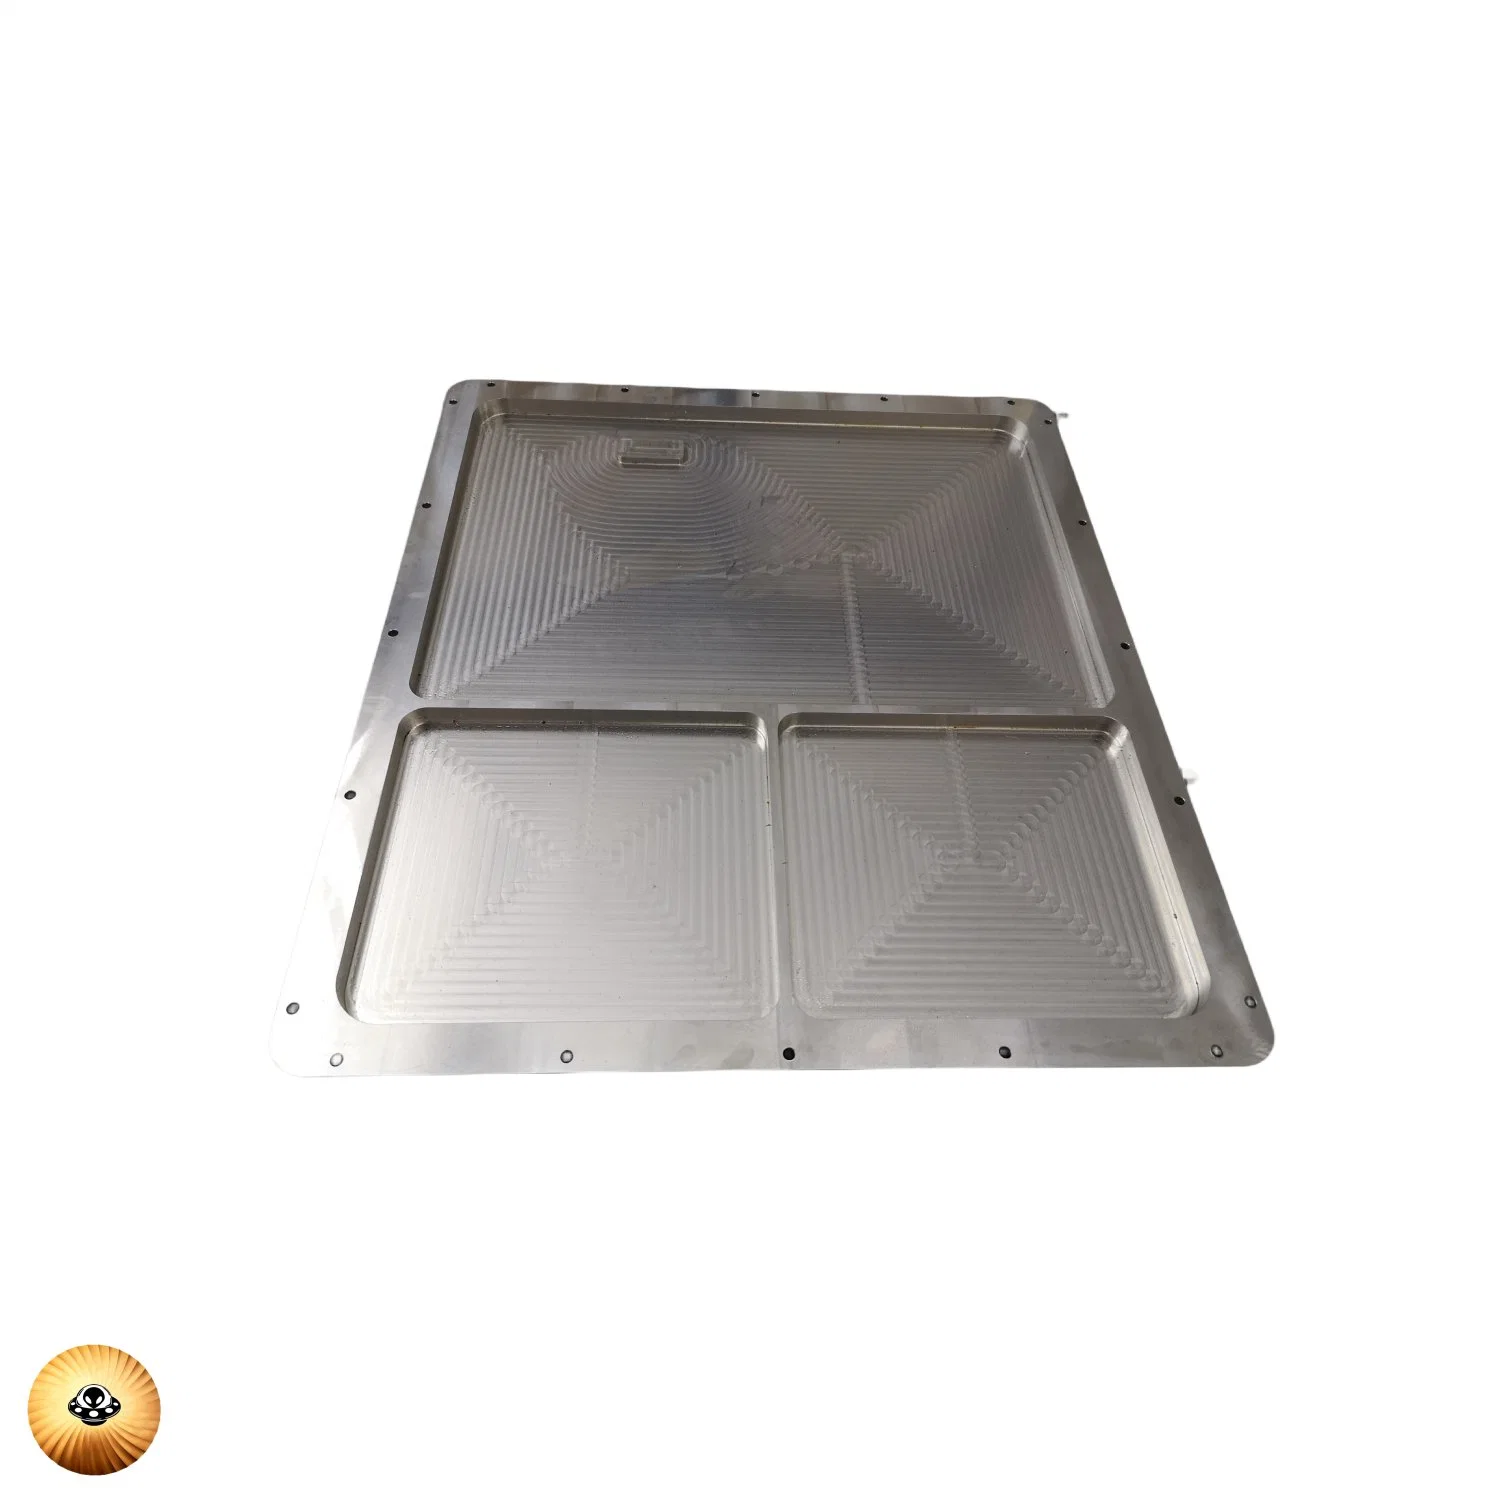 OEM/ODM CNC Aluminum Box Cover Precision Machining Chamber Top Cover Process